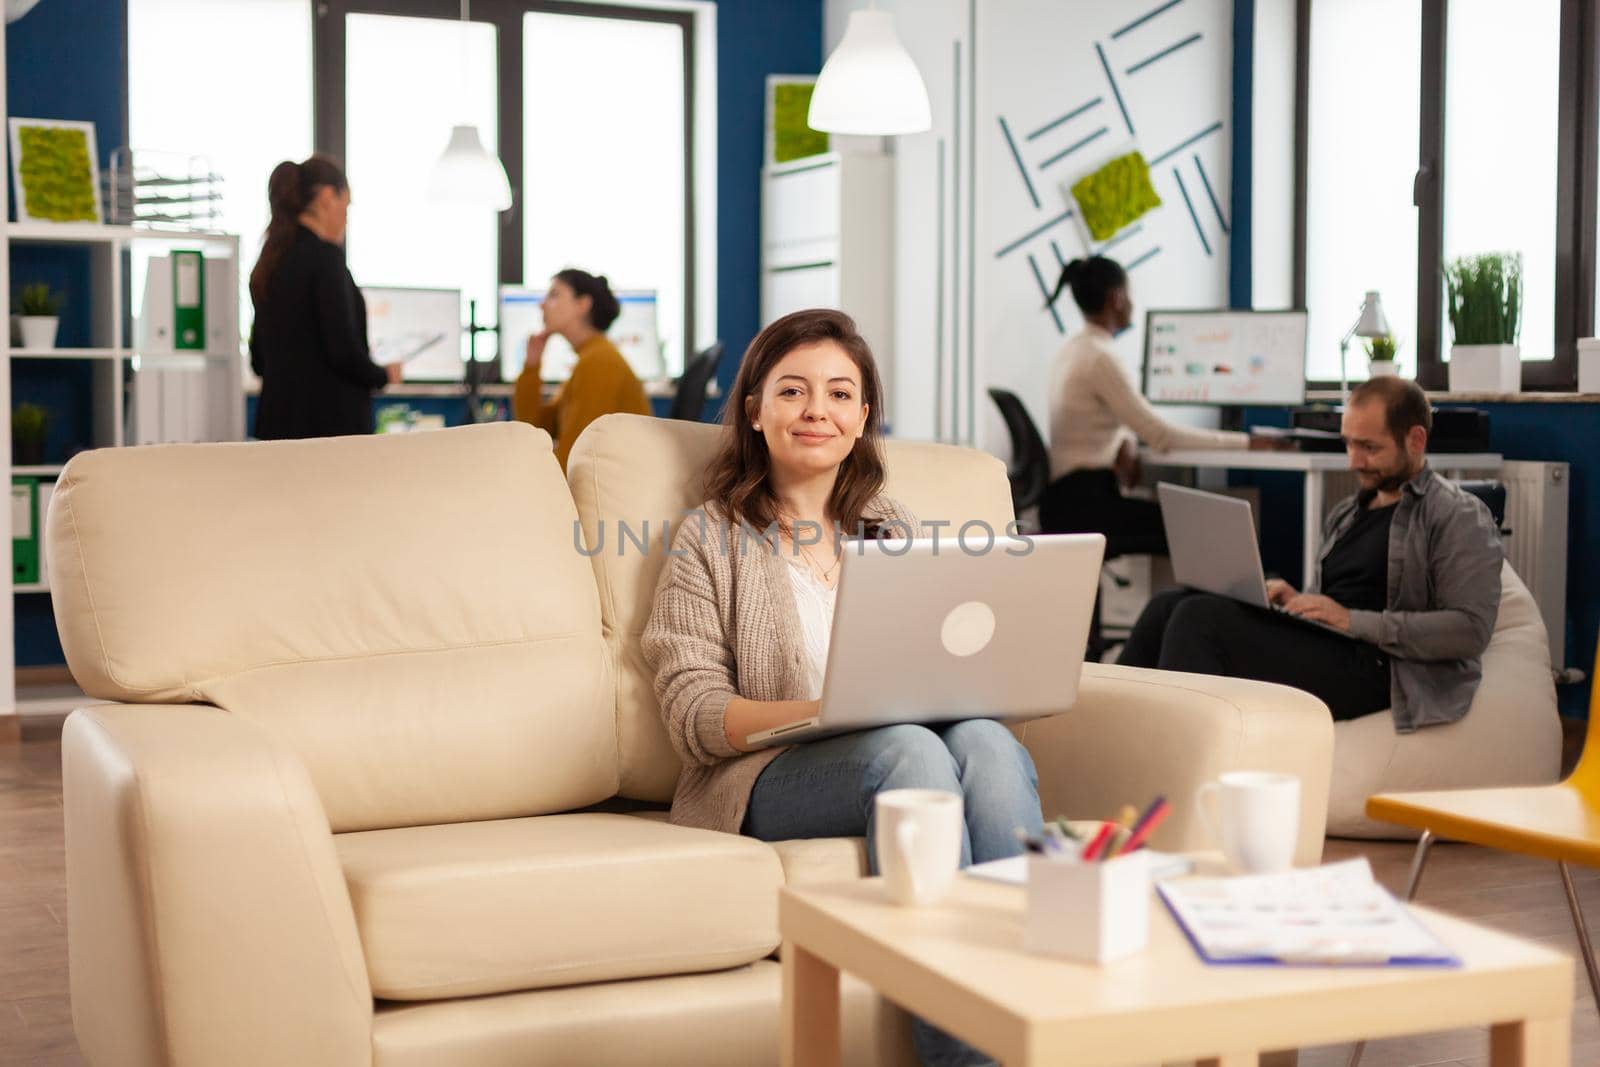 Happy manager woman sitting on sofa in front of camera smiling holding laptop while diverse colleagues working in background. Multiethnic coworkers analysing startup financial reports in modern office